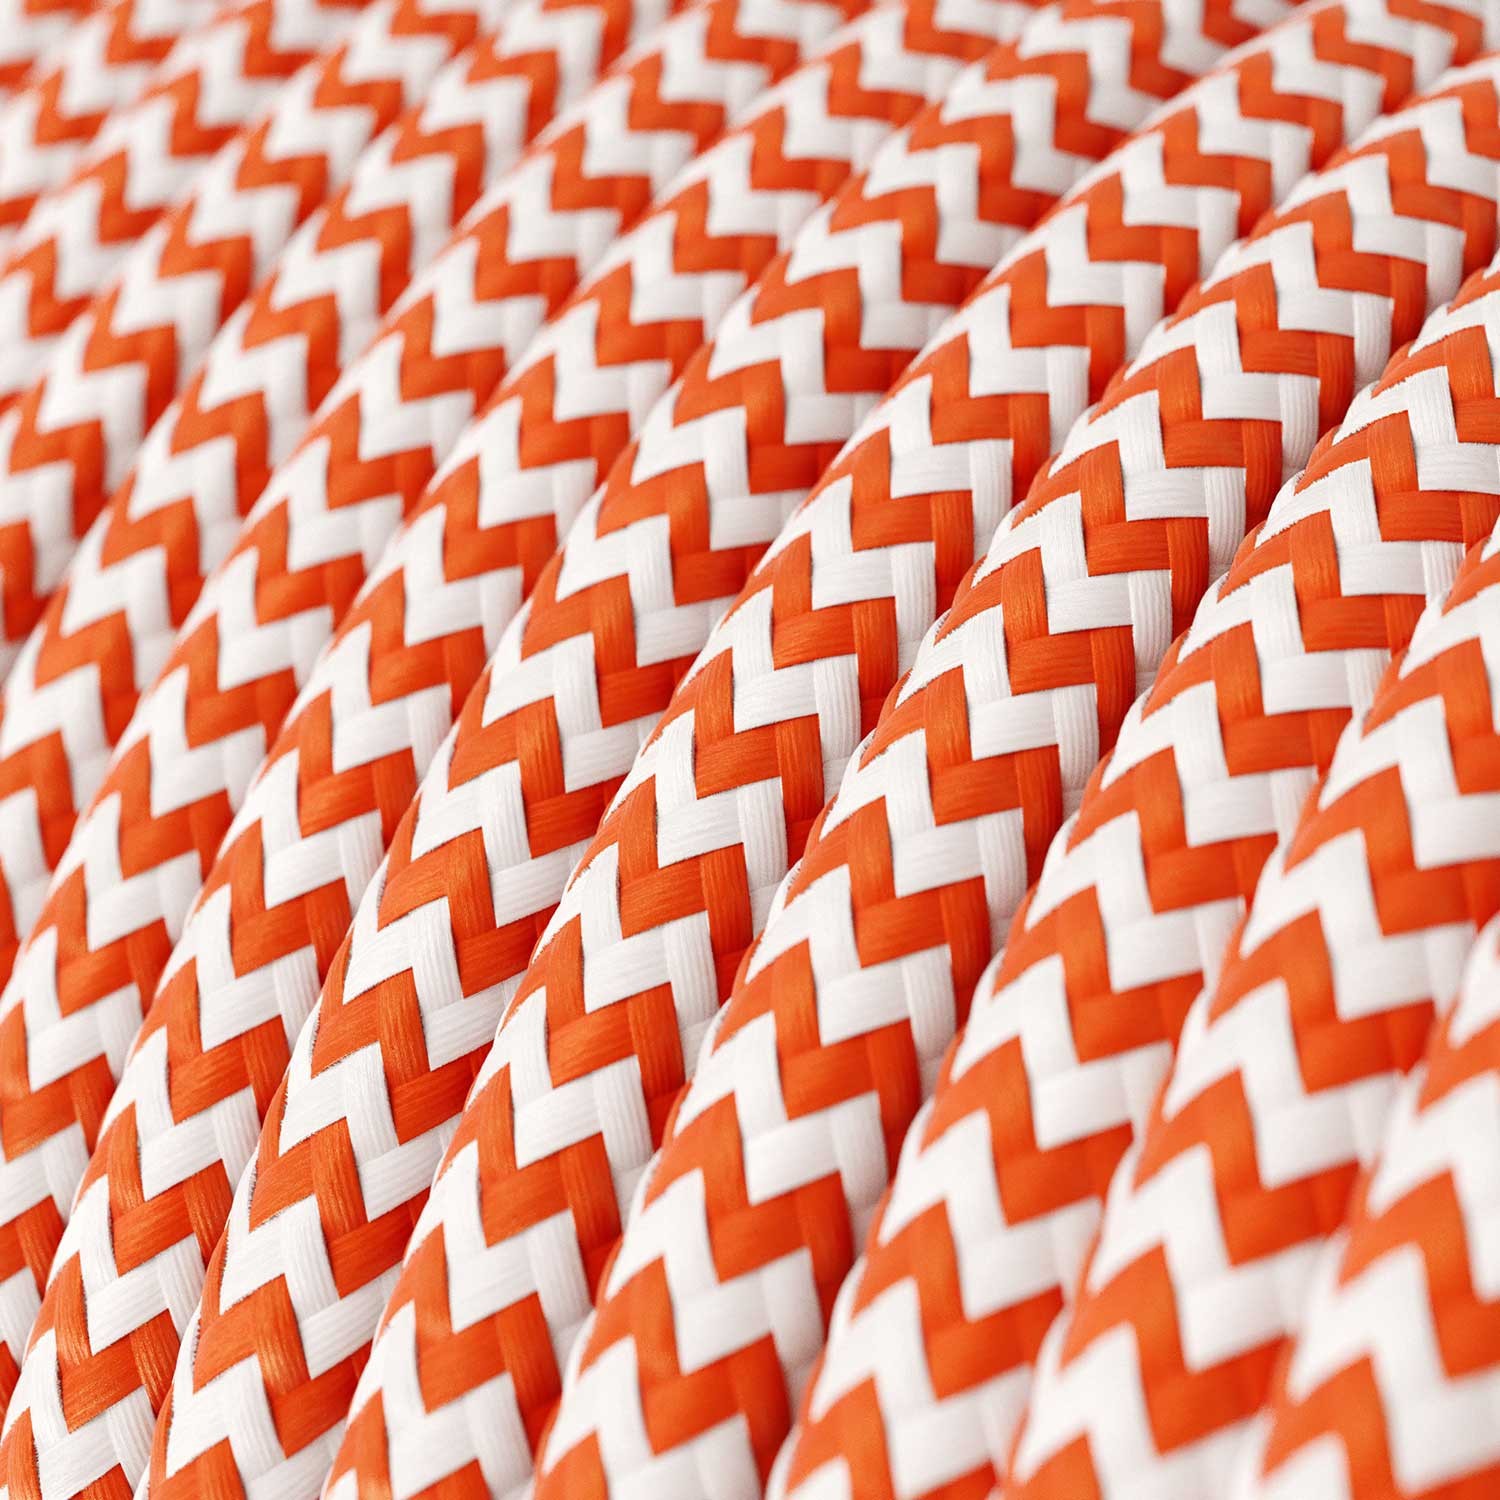 Round Electric Cable covered by Rayon fabric Zig Zag RZ15 Orange